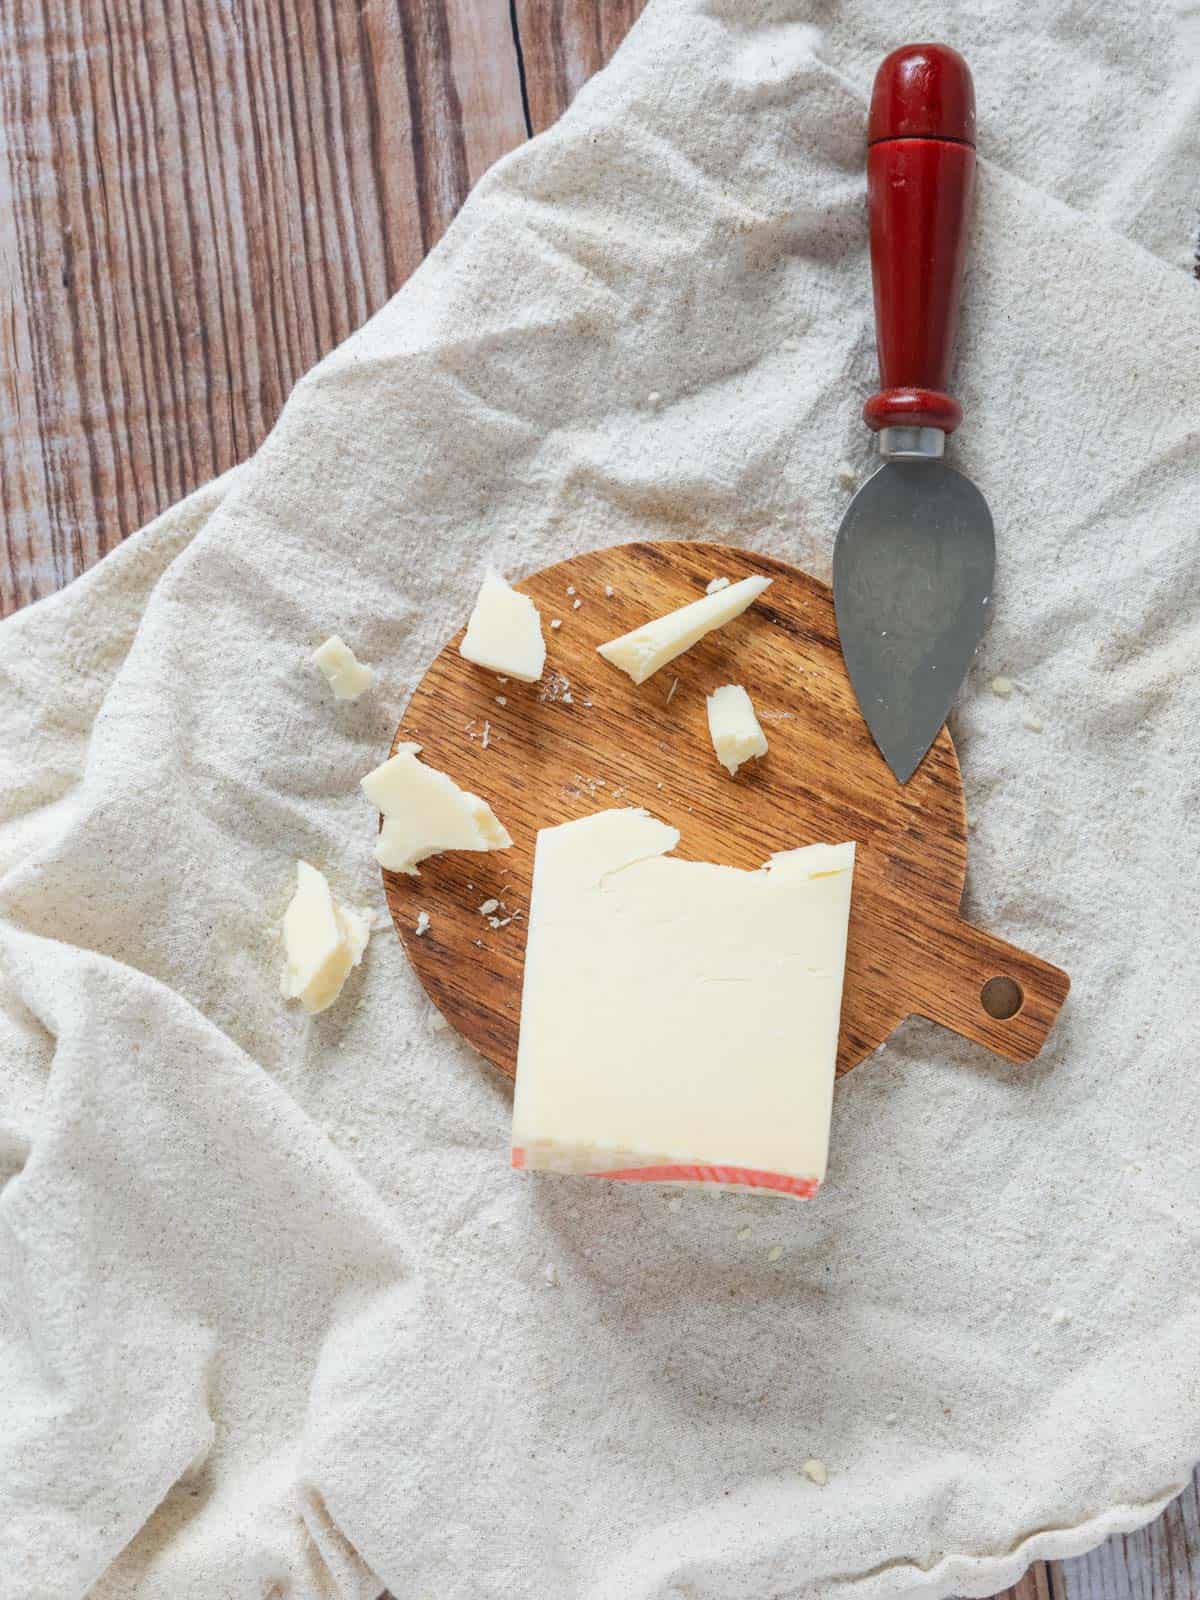 partially broken up wedge of aged italian provolone cheese on a small wooden circle with a cheese knife.